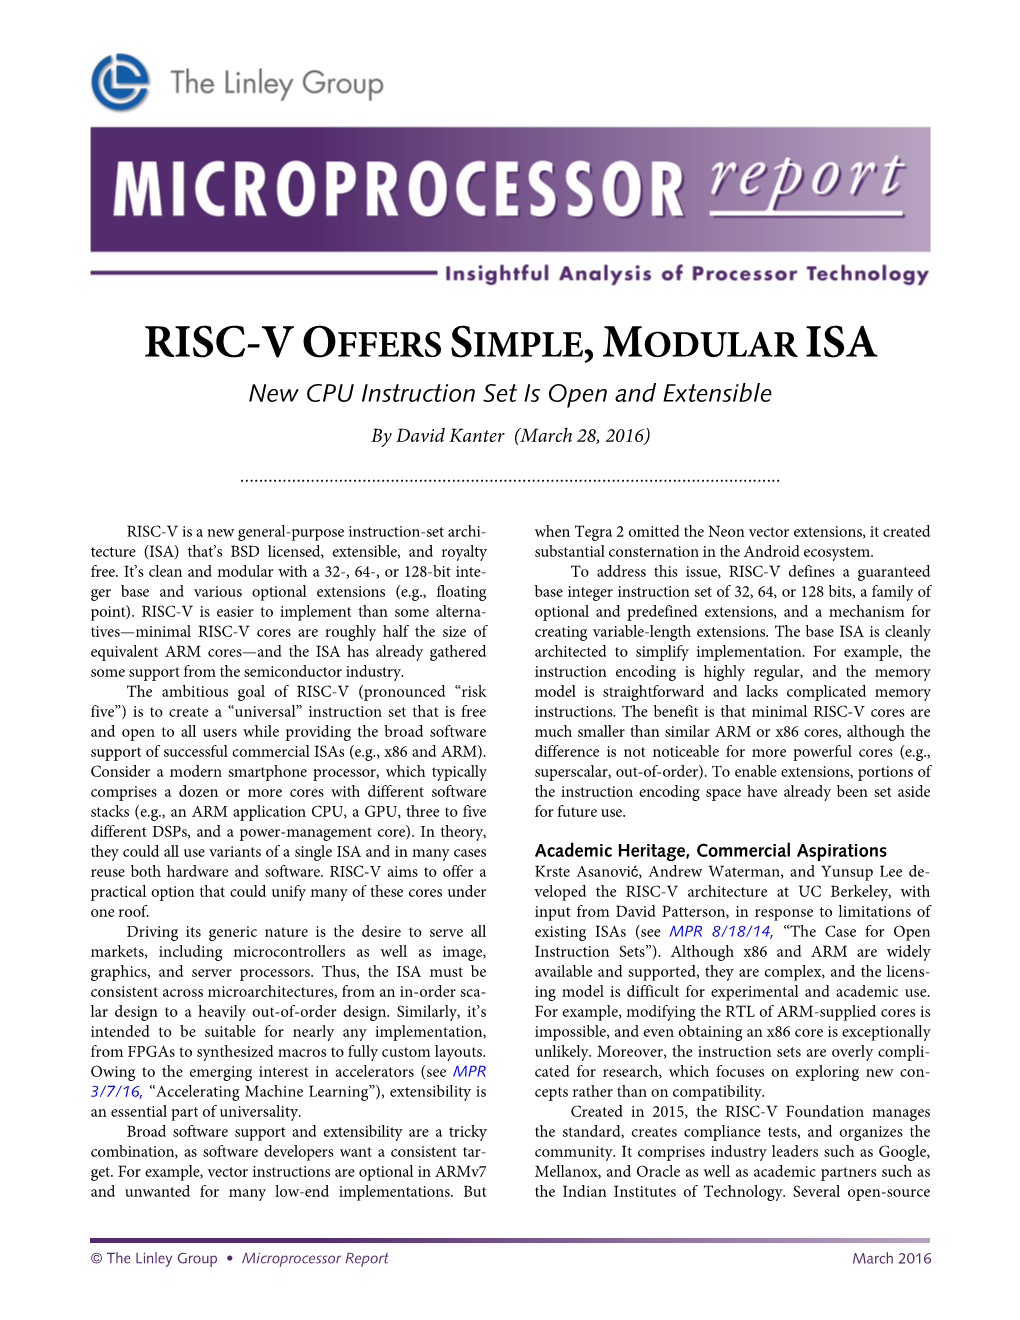 RISC-V OFFERS SIMPLE, MODULAR ISA New CPU Instruction Set Is Open and Extensible